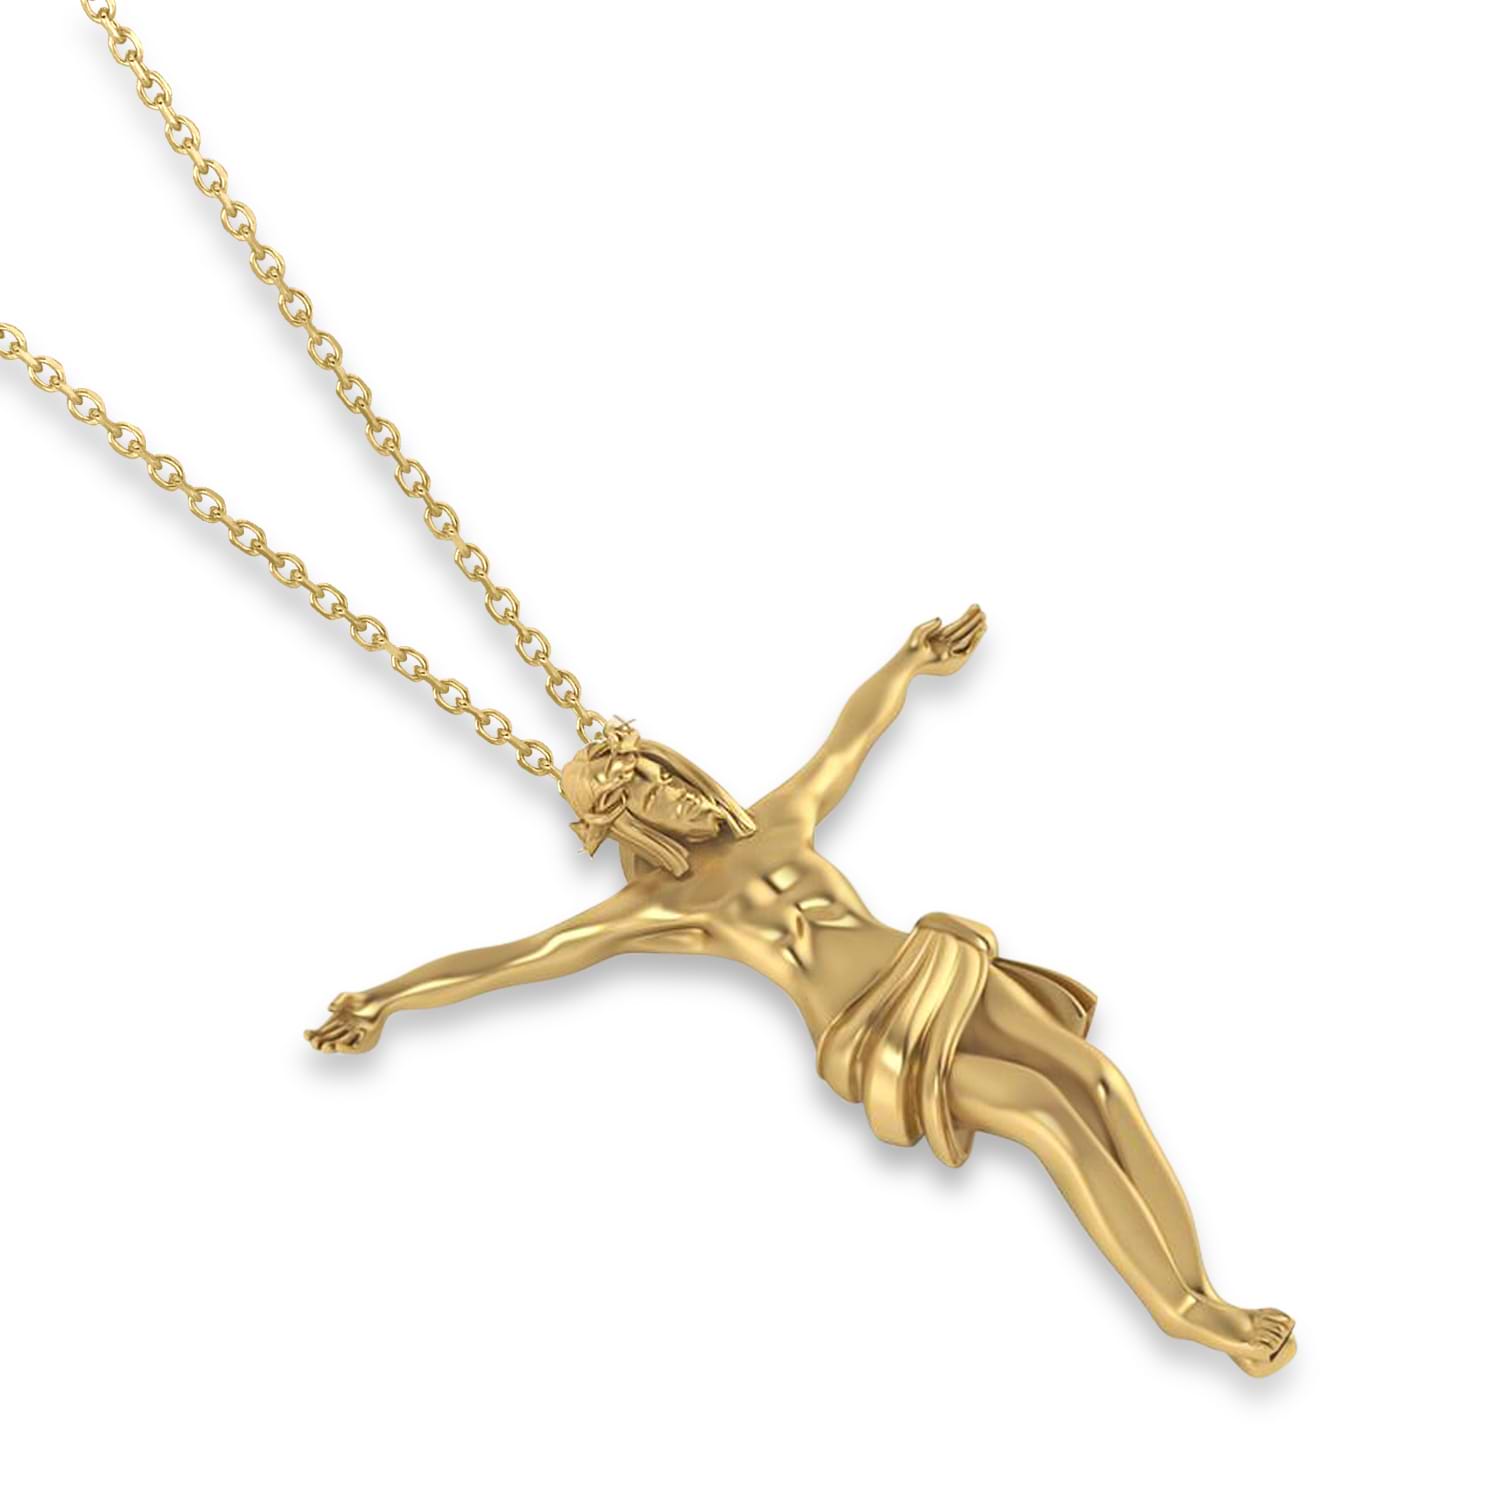 Crucified Jesus Christ Pendant Necklace 14k Yellow Gold